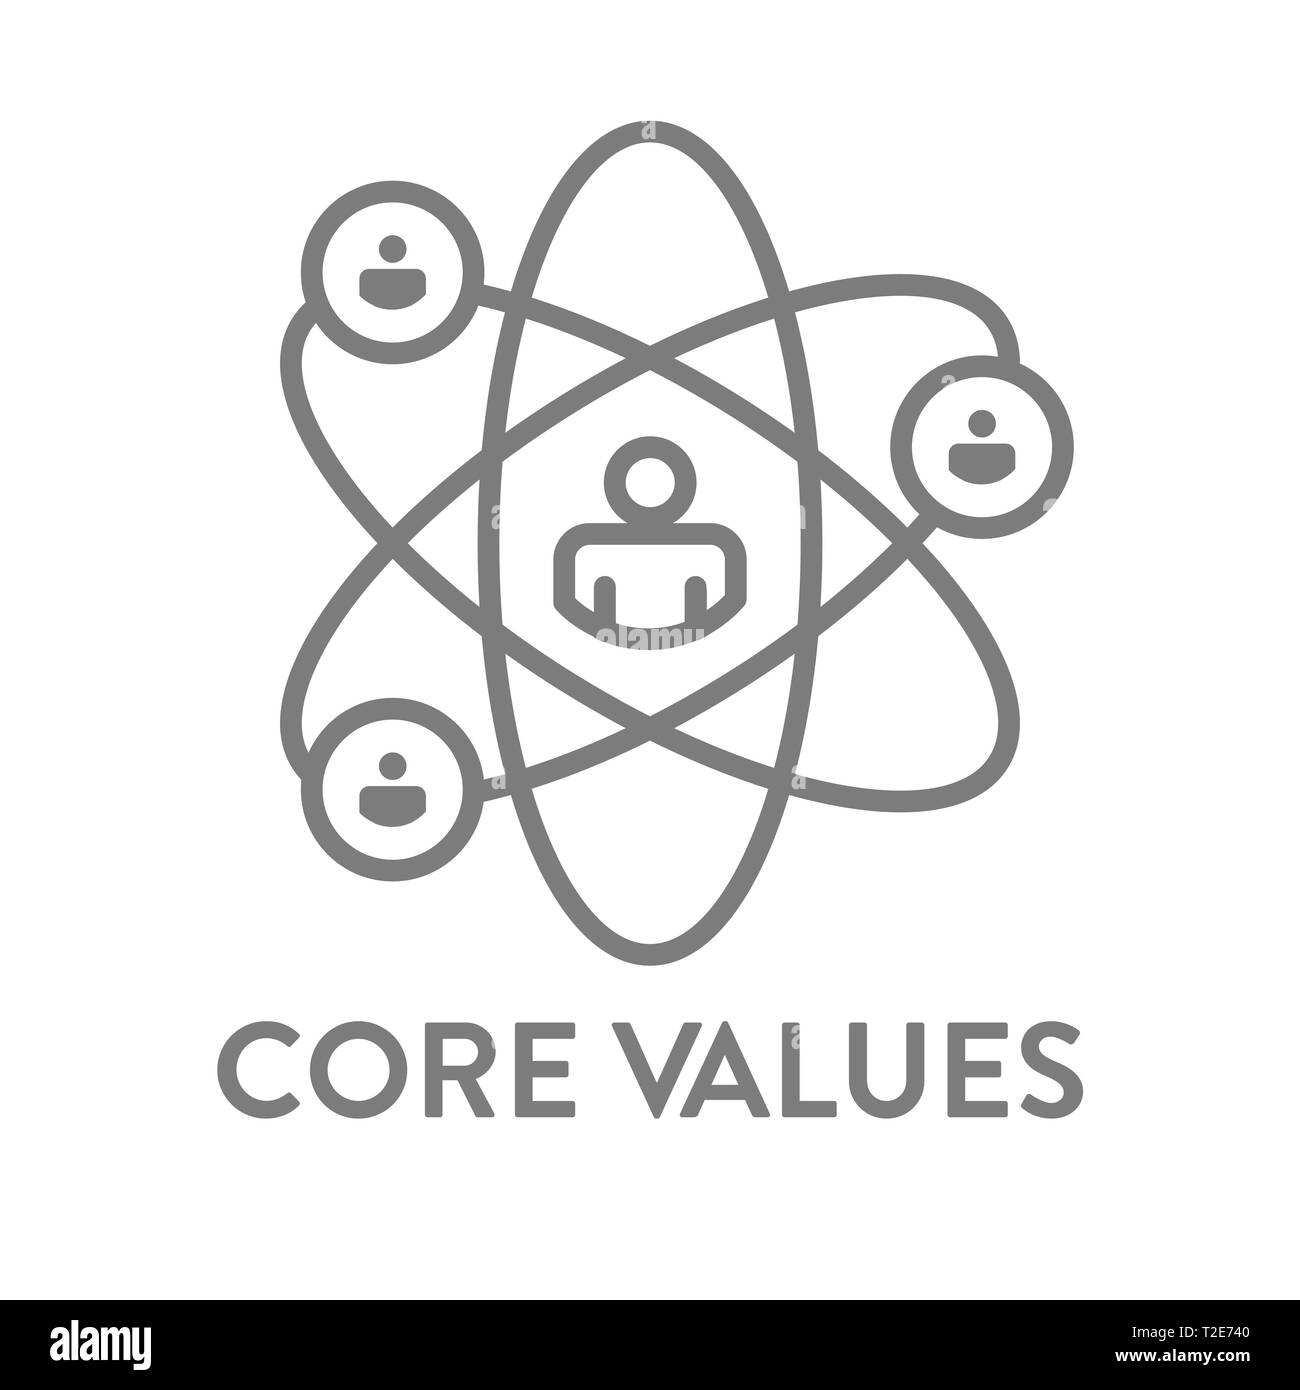 Core Values Outline / Line Icon Conveying Integrity & Purpose Stock Vector